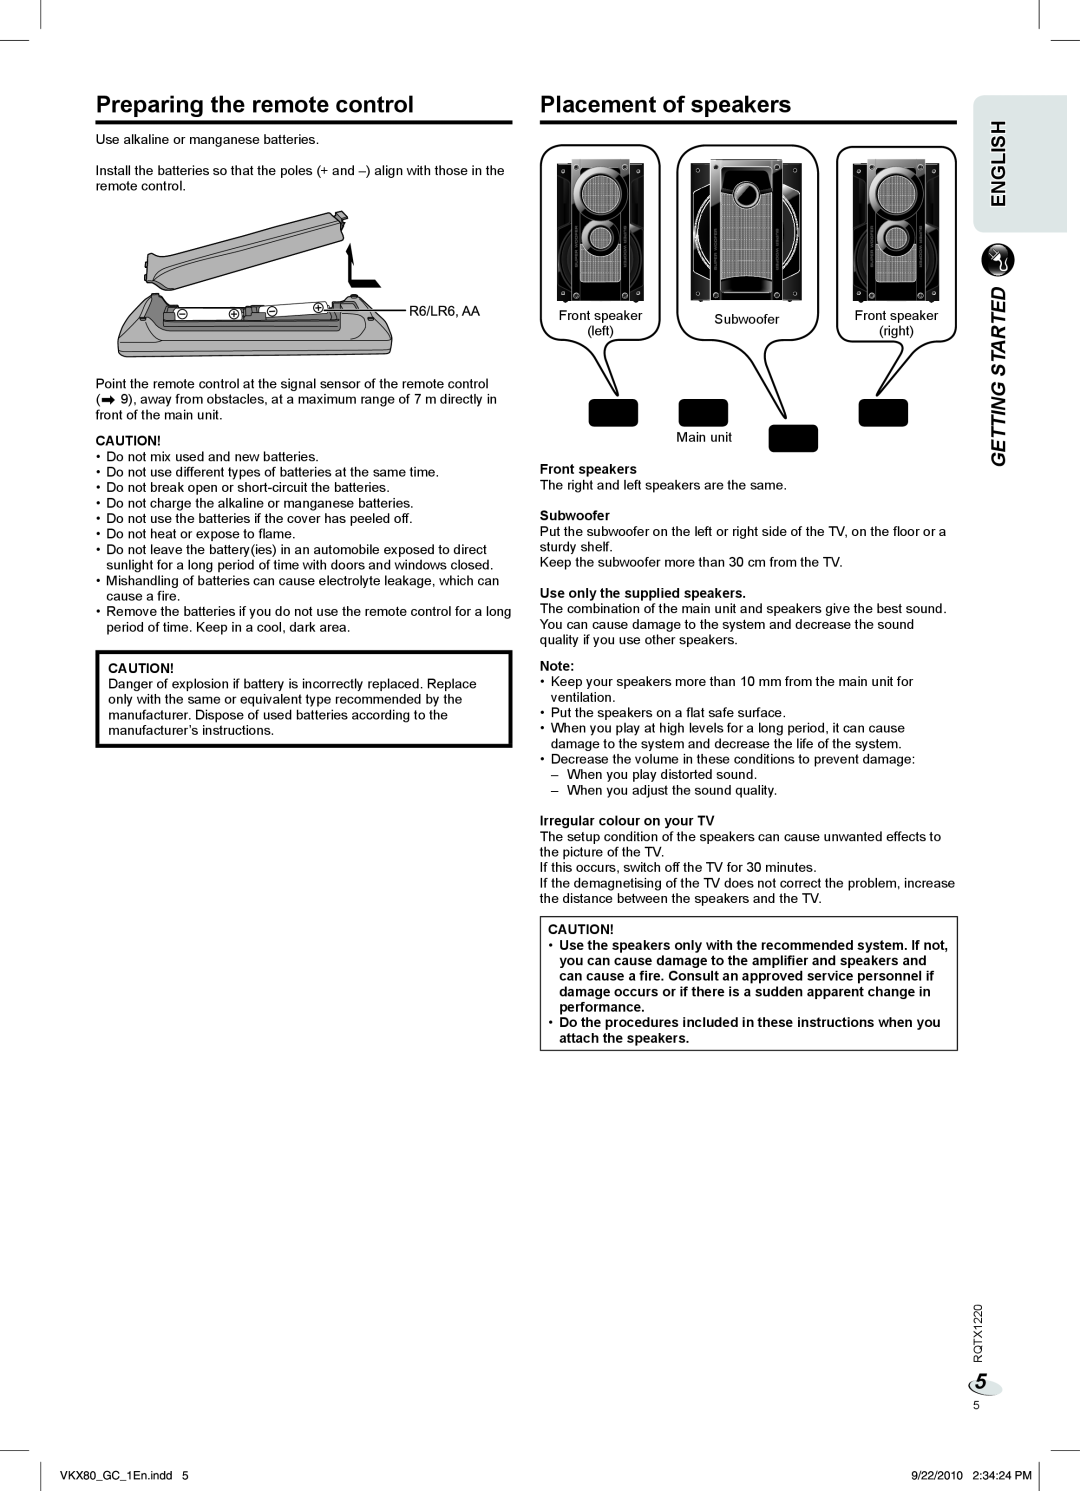 Panasonic SC-VKX80 manual Preparing the remote control, Placement of speakers, Started, Getting, English 